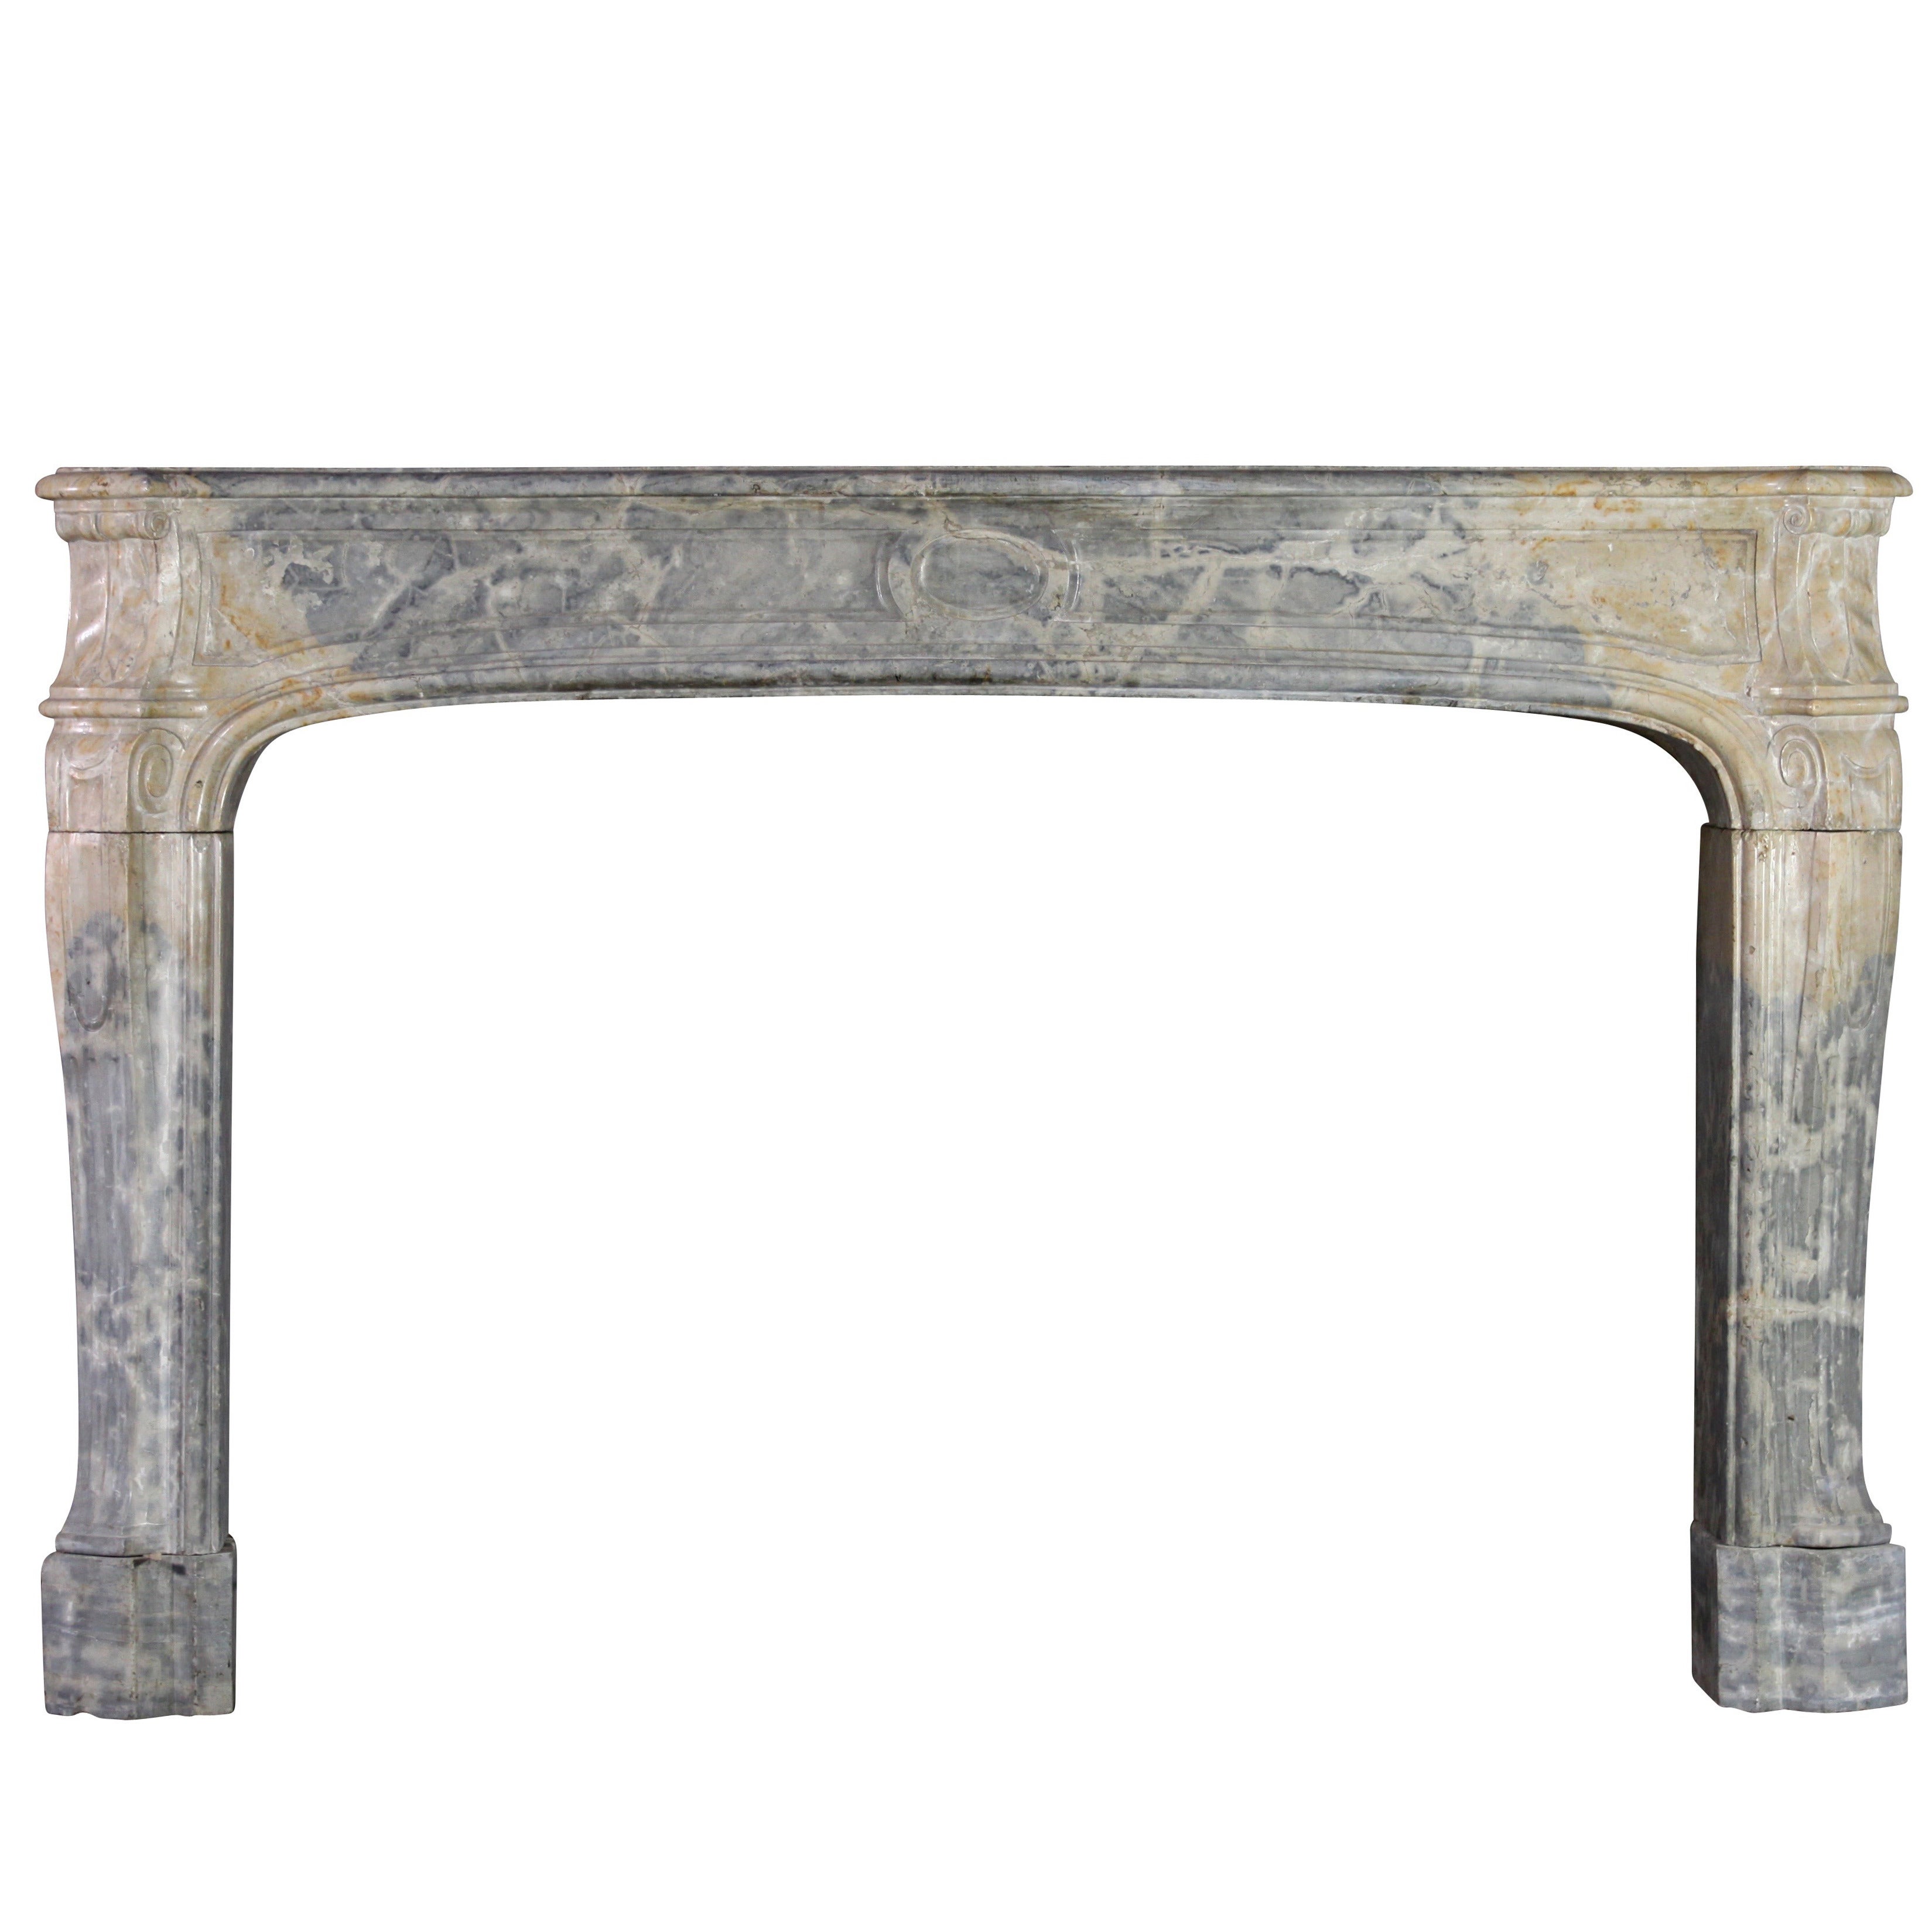 18th Century Louis XIV Fine French Antique Fireplace Mantel in Hard Stone